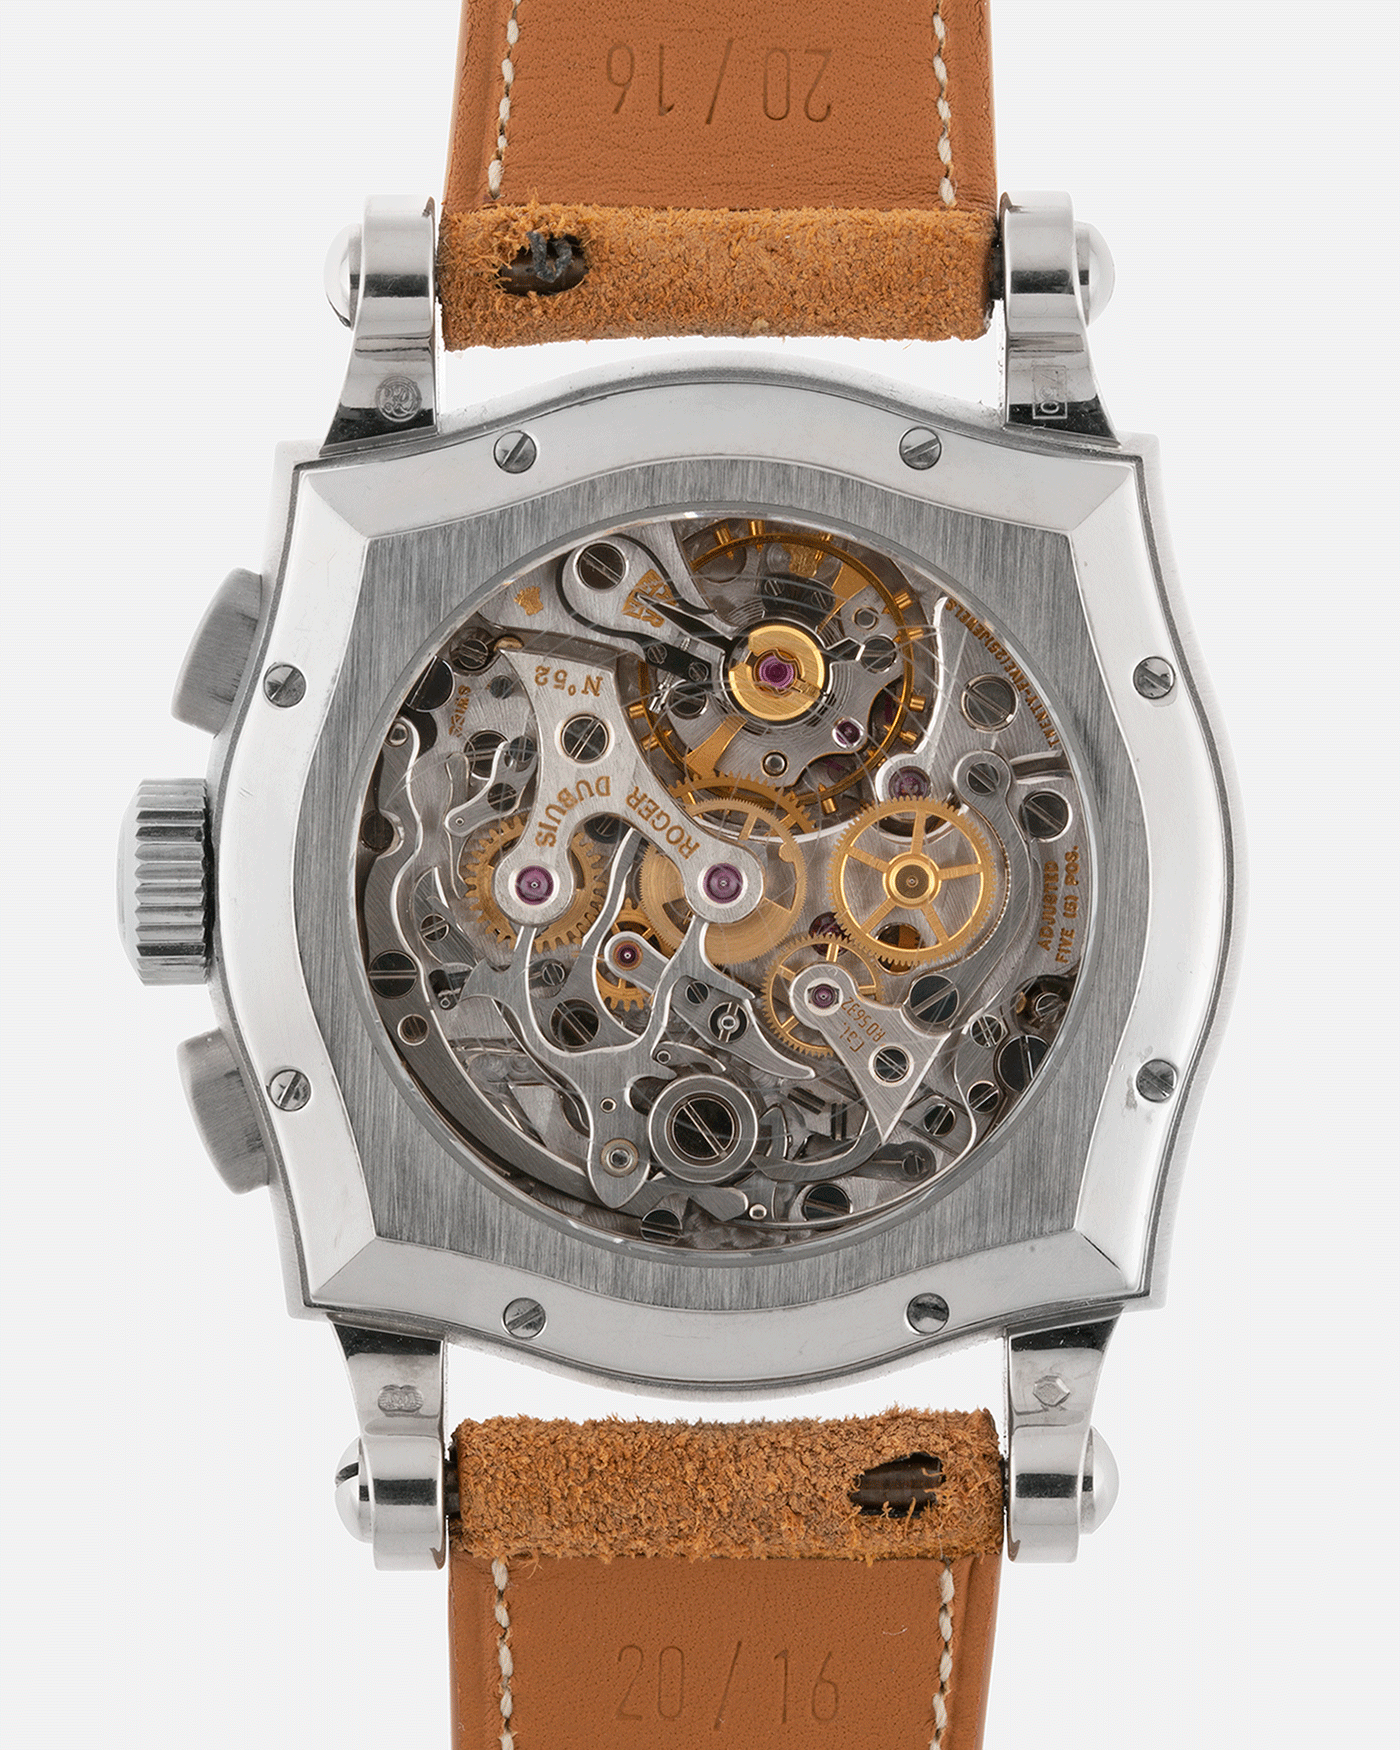 Brand: Roger Dubuis Year: 2000’s Model: Sympathie 37 Perpetual Chronograph Material: 18k White Gold Movement: Cal RD 5637 Case Diameter: 37mm Strap: Nostime Sand Tan Suede Calf with 18k White Gold Roger Dubuis Tang Buckle